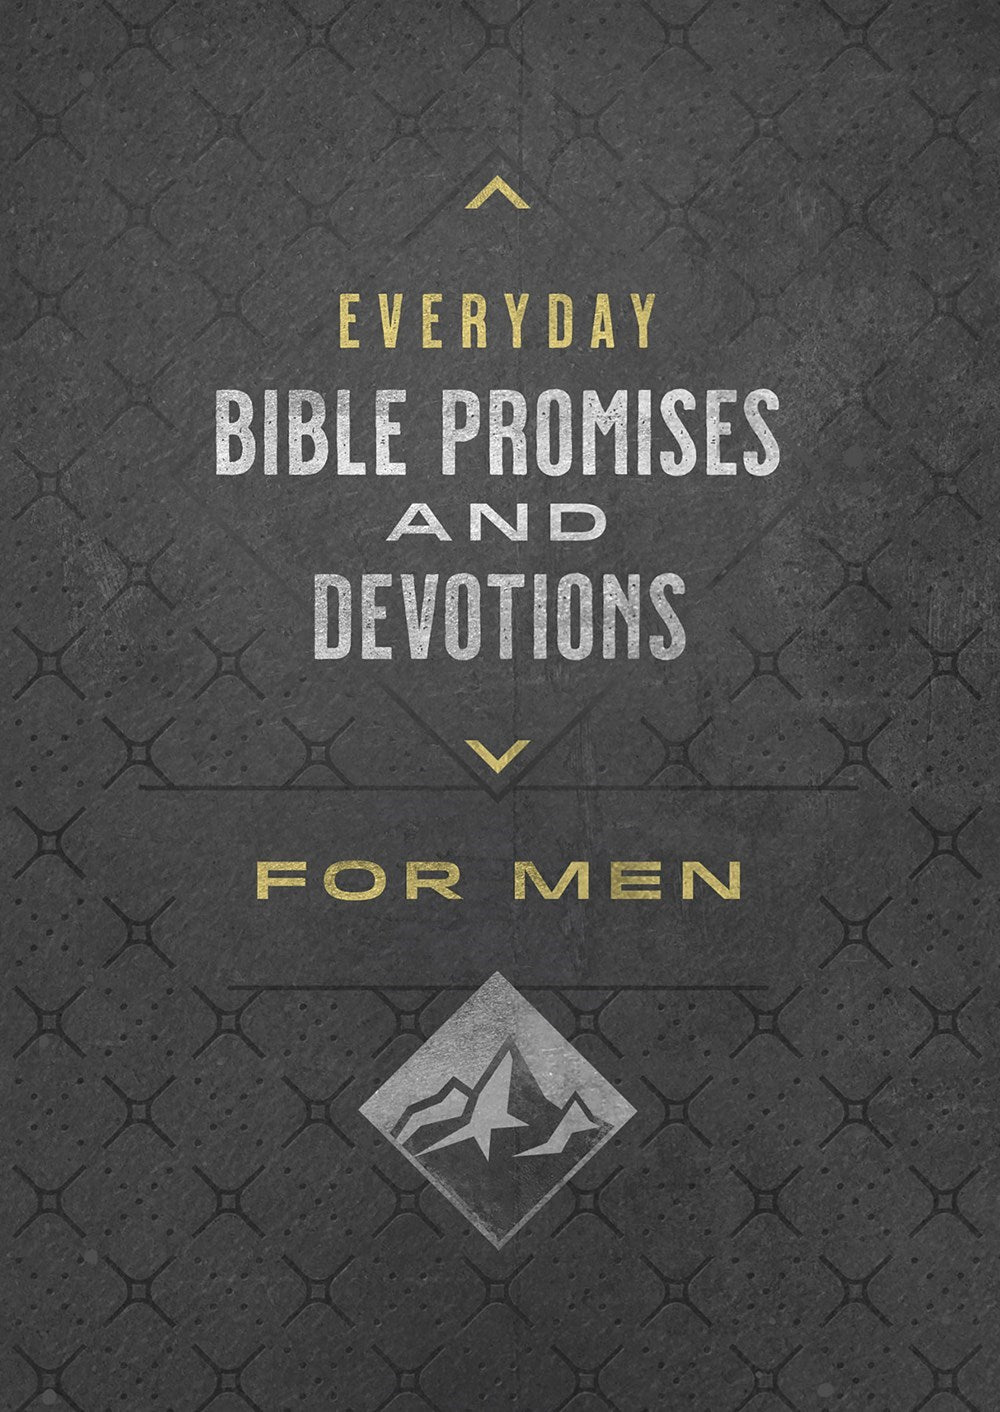 Everyday Bible Promises and Devotions for Men - The Christian Gift Company